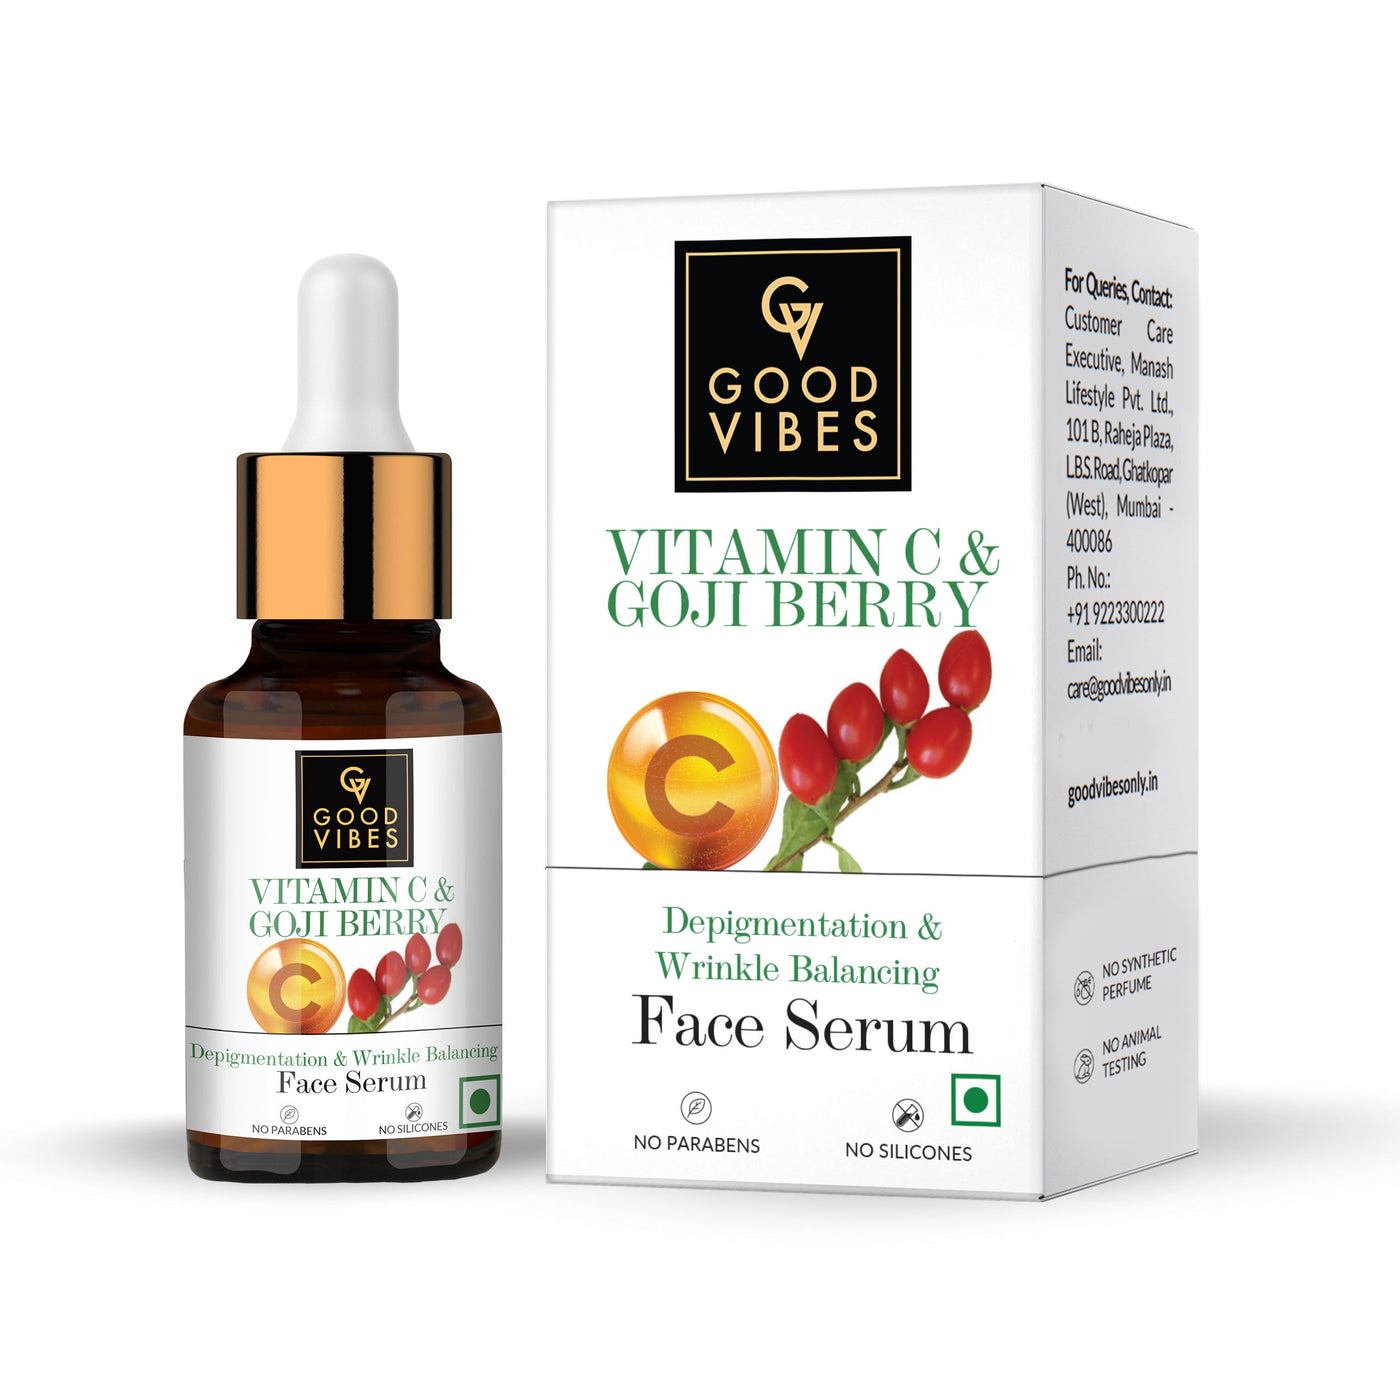 good-vibes-vitamin-c-and-goji-berry-depigmentation-and-wrinkle-balancing-face-serum-10-ml-9